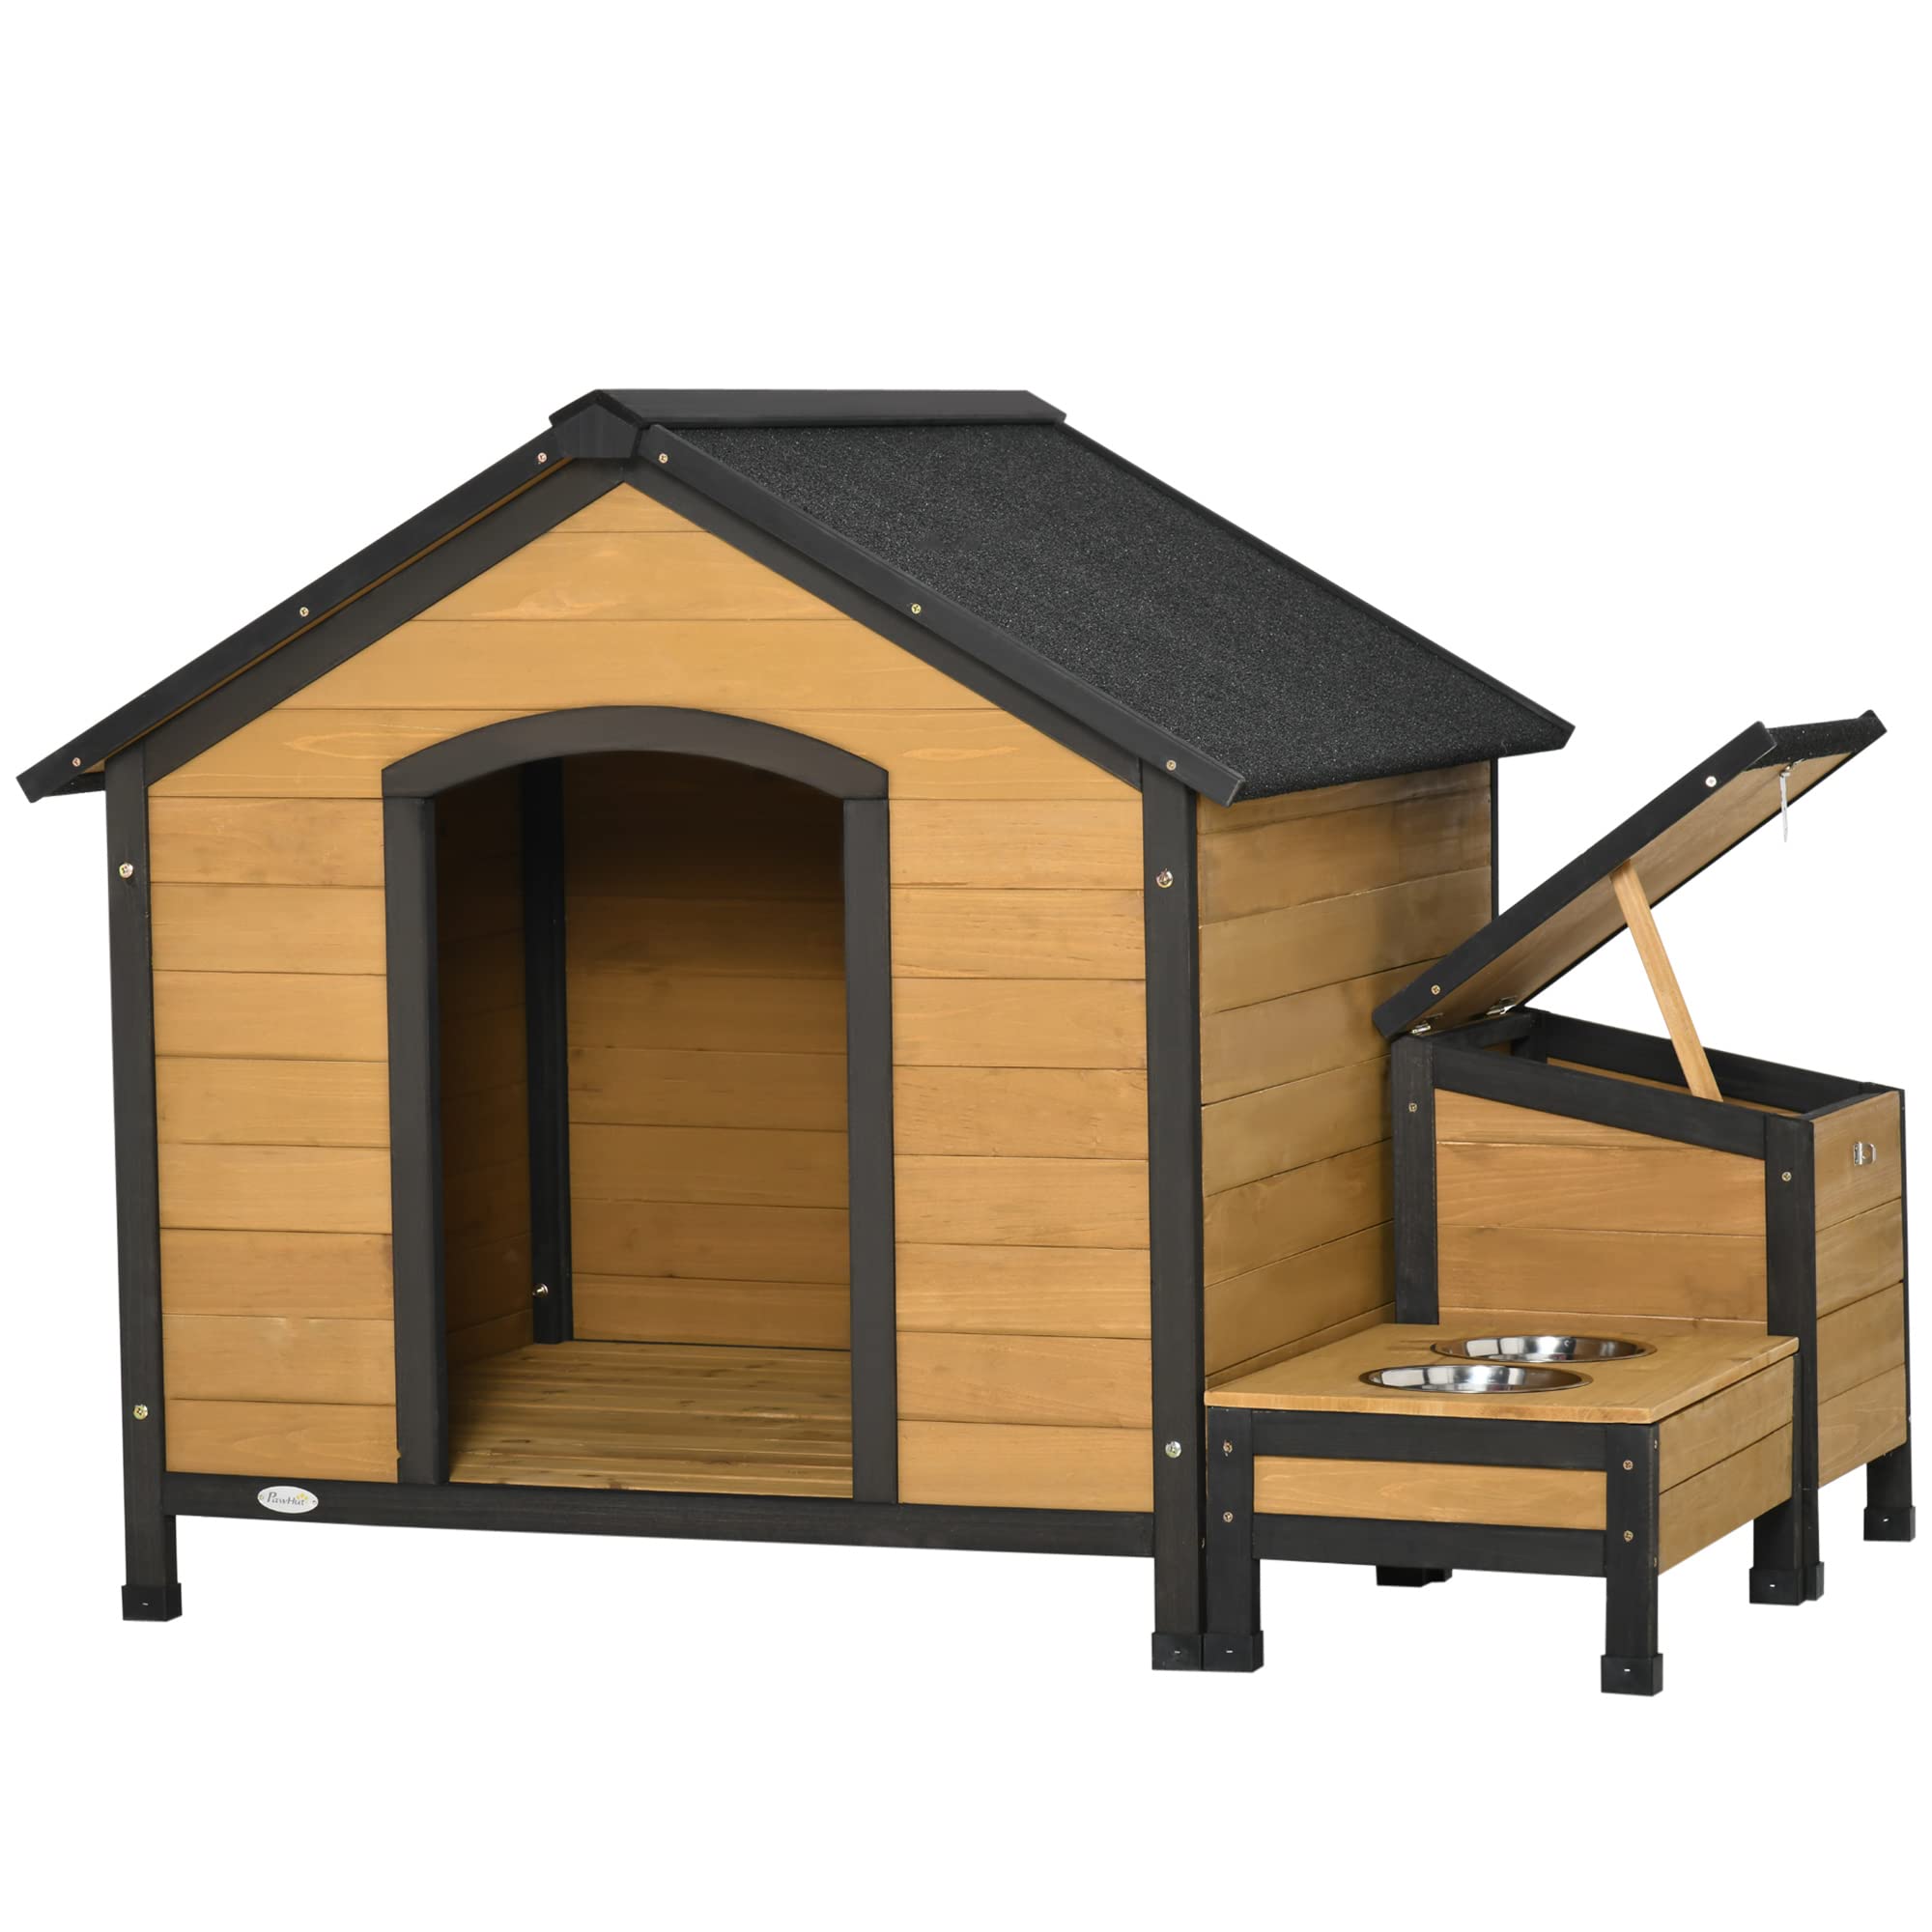 PawHut Wooden Outdoor Dog House cabin-Style Pet House with Feeding Bowls Asphalt Roof Storage Box for Dogs Up to 66 Lbs. Natural